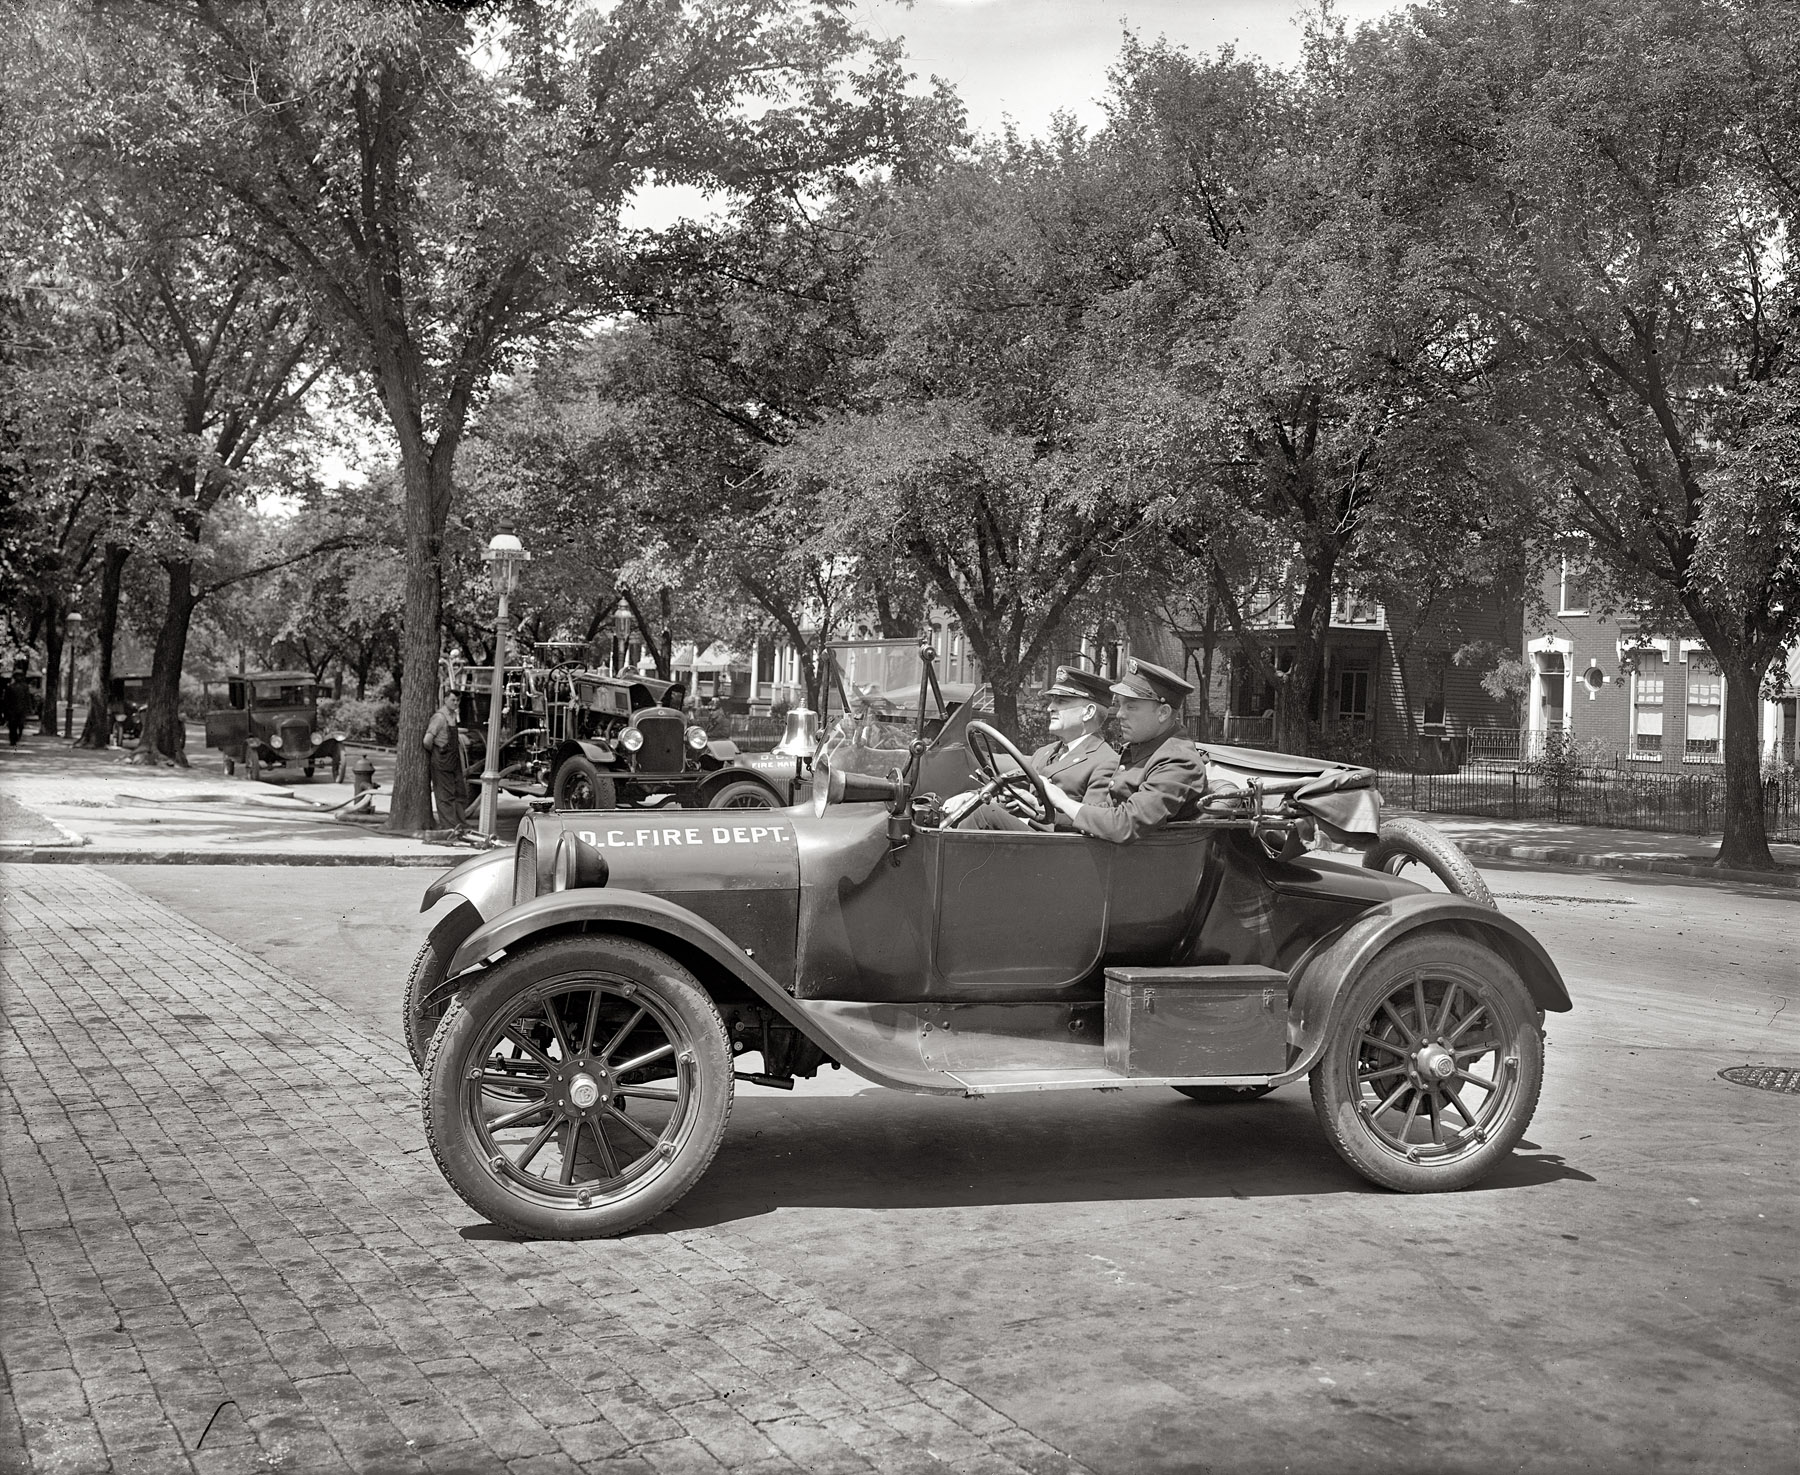 "Semmes Motor Co." Washington, D.C., Fire Department car (a Dodge) circa 1926. View full size. National Photo Company Collection glass negative.